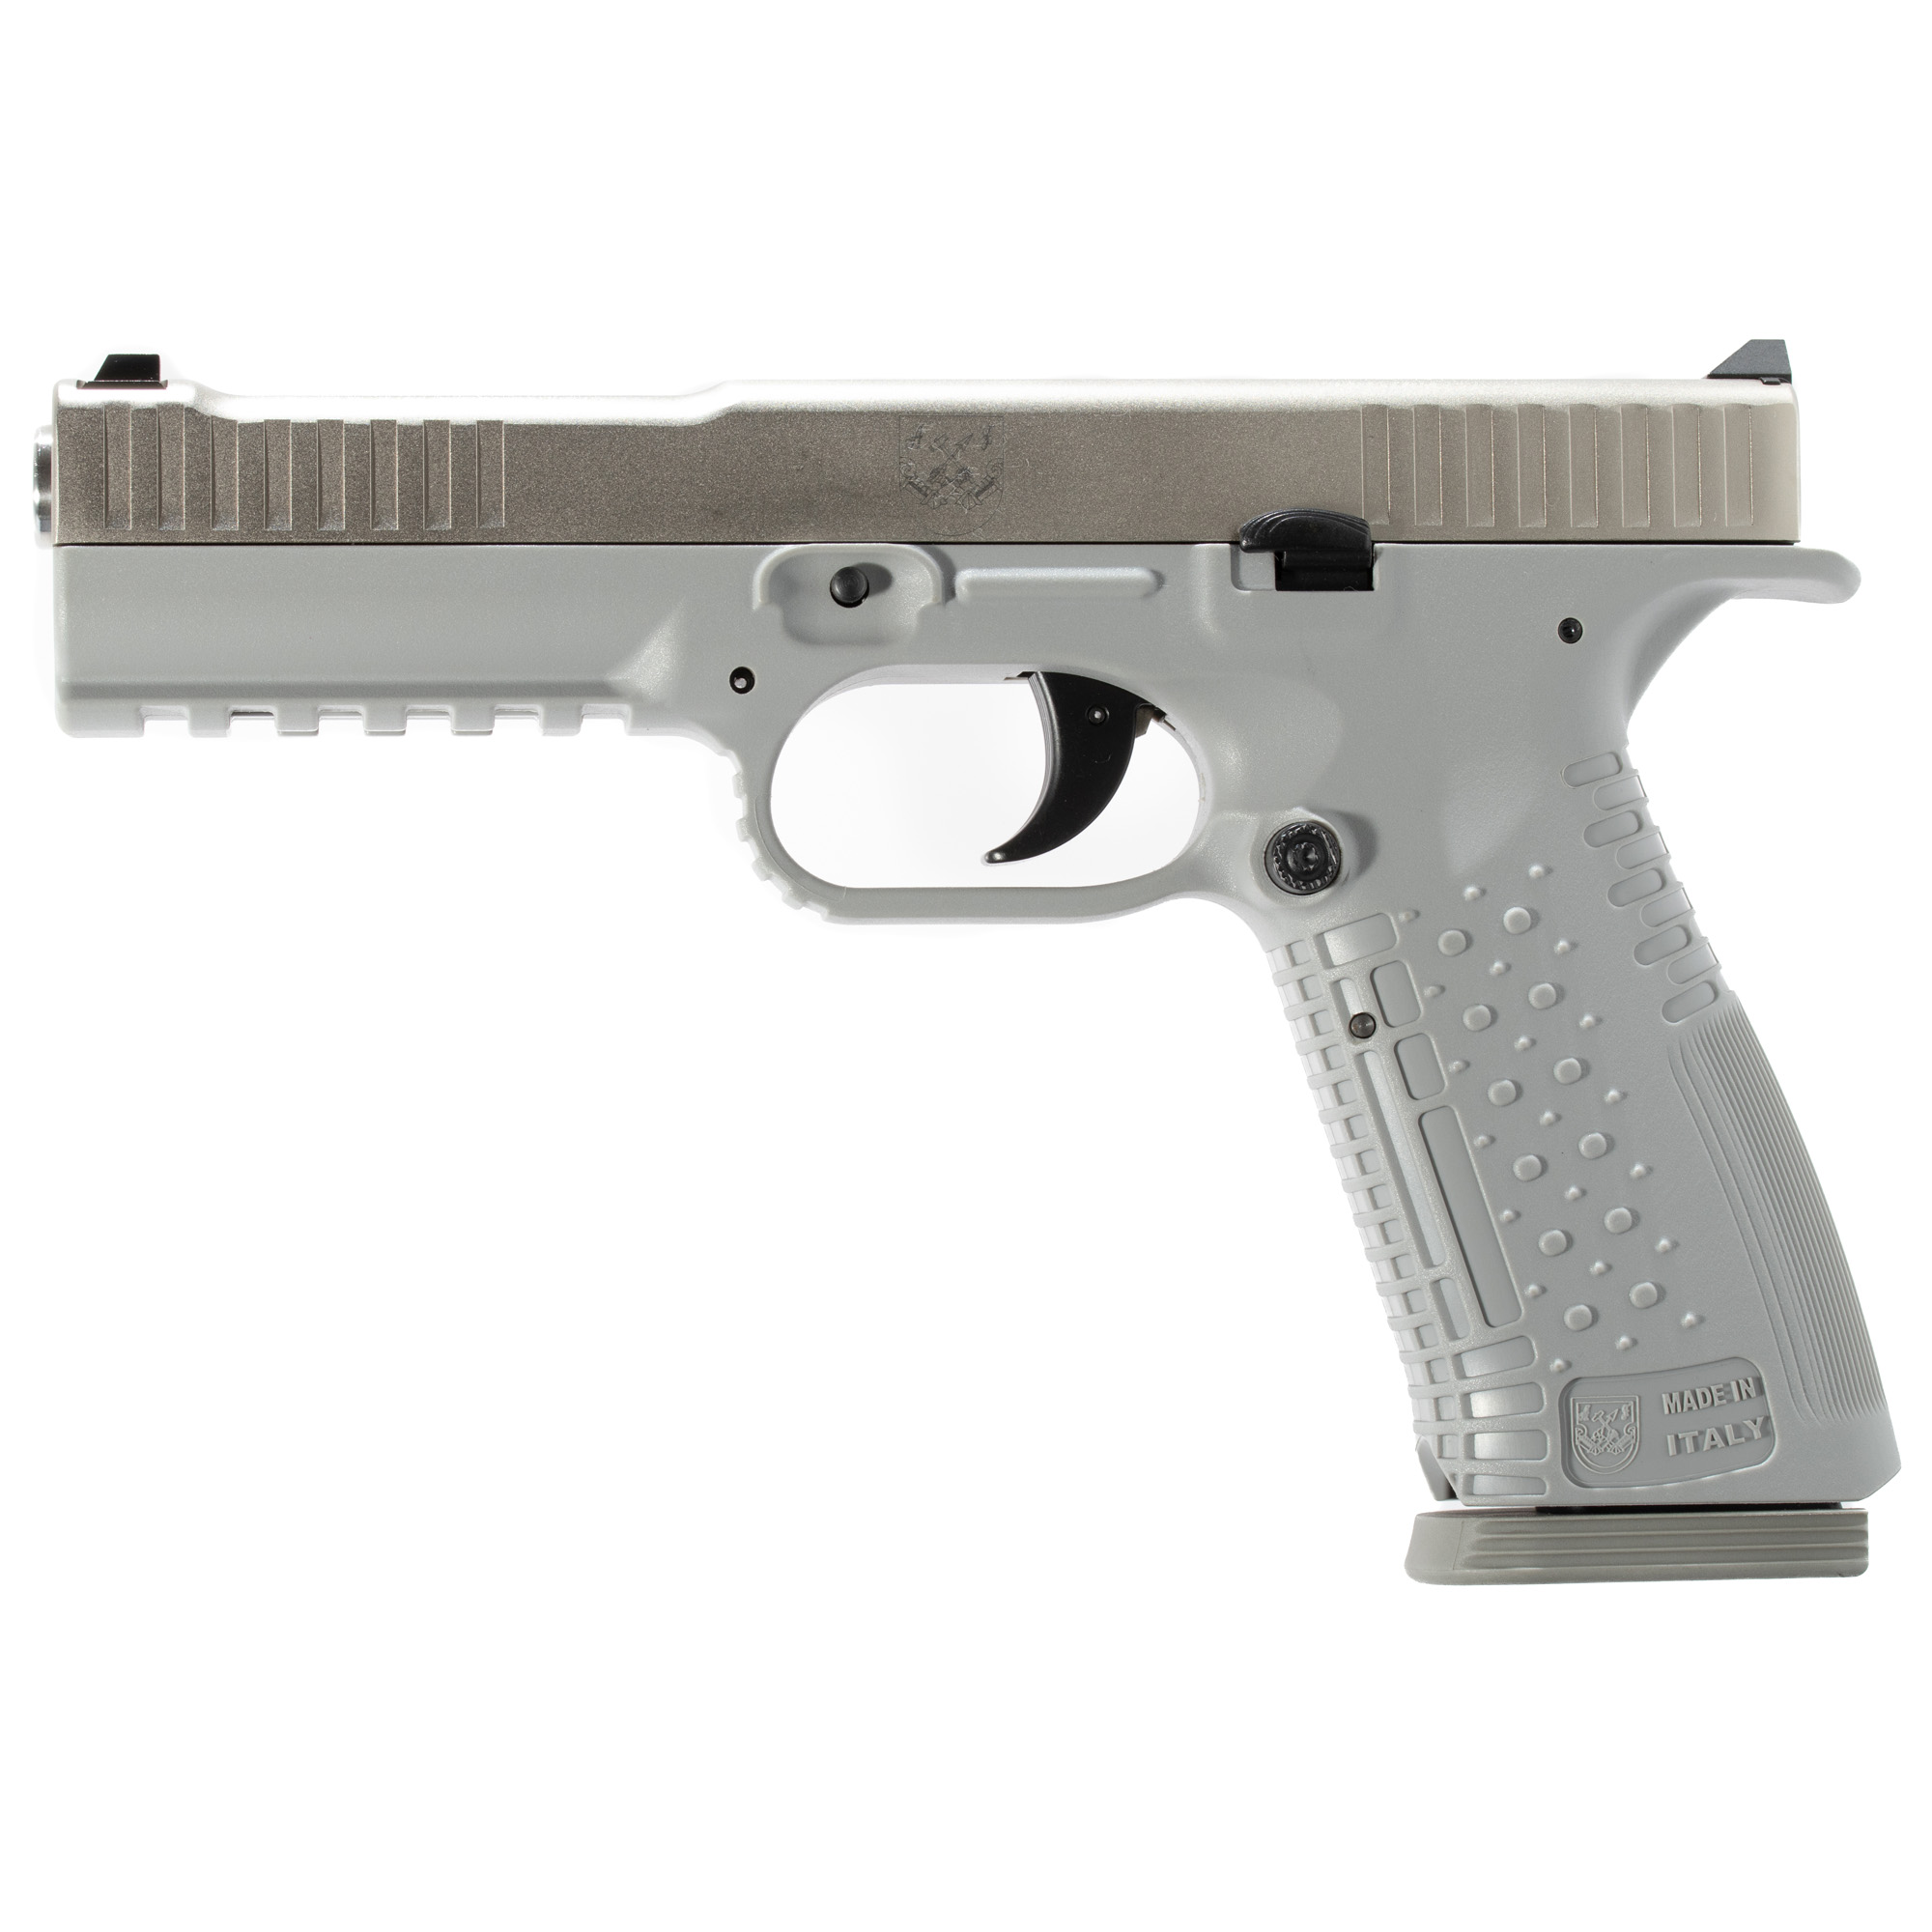 AMPF STRIKE ONE 9MM 5 17RD SILVER